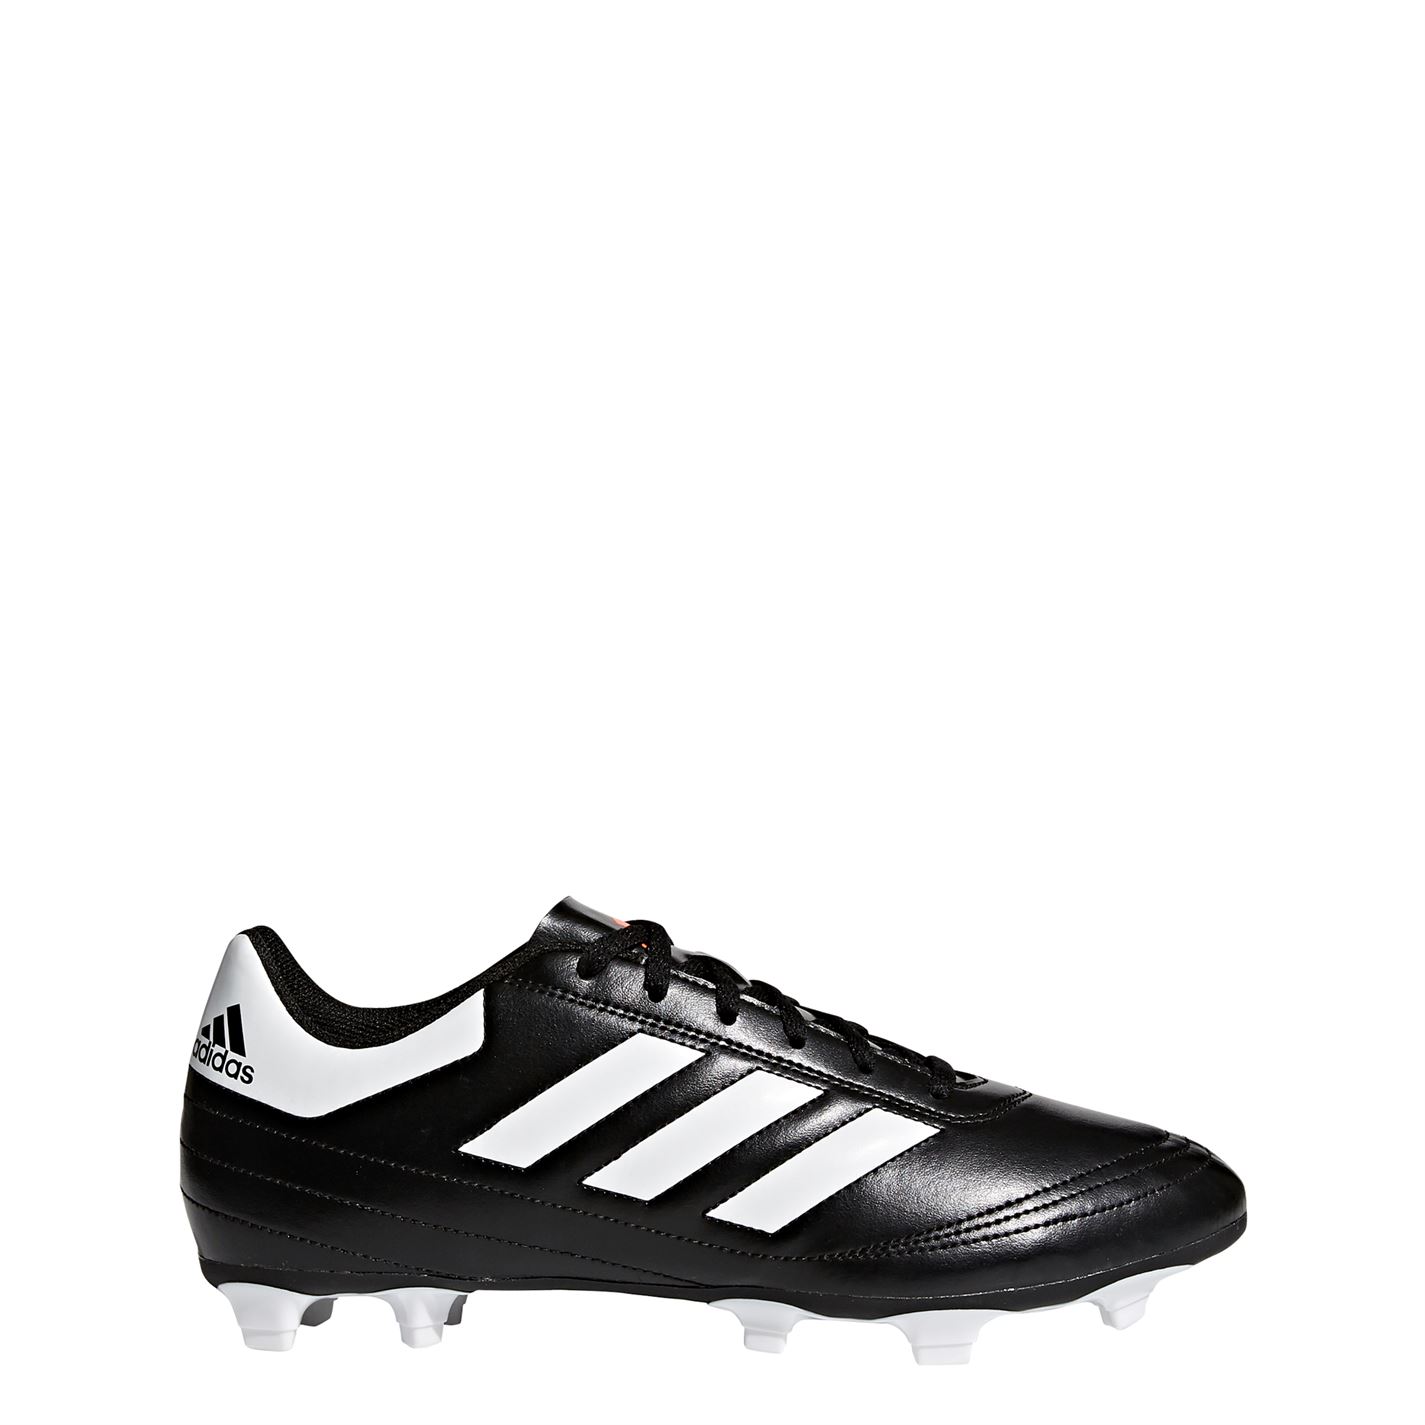 Adidas Goletto VI Firm Ground Mens Football Boots